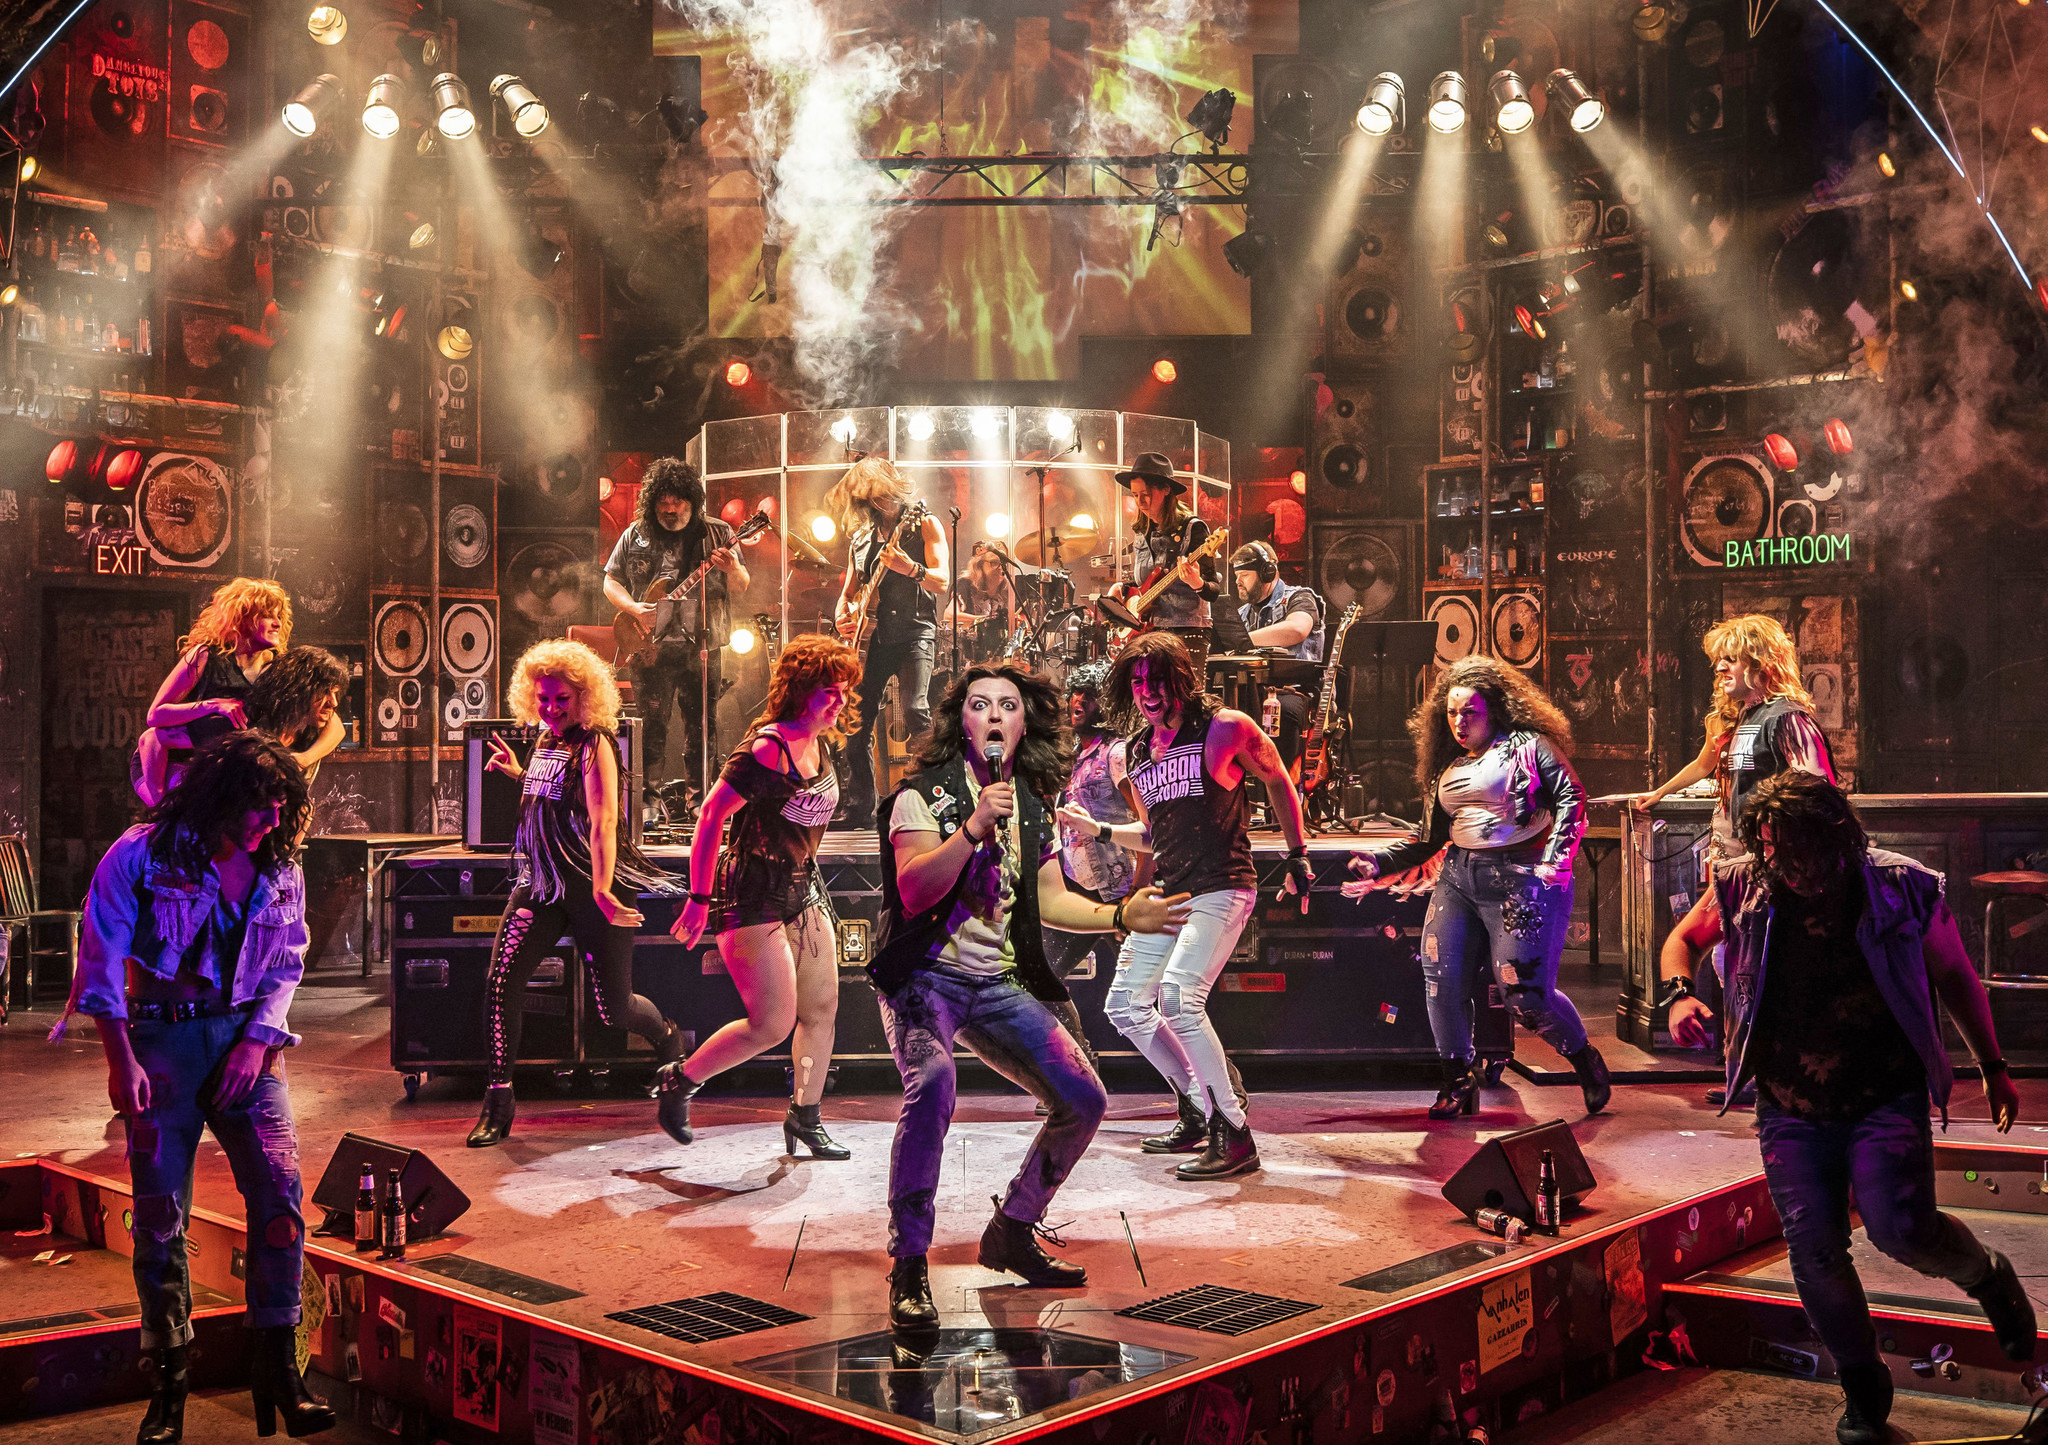 Amped Up and Ready to Rock: A Review of Rock of Ages at Paramount